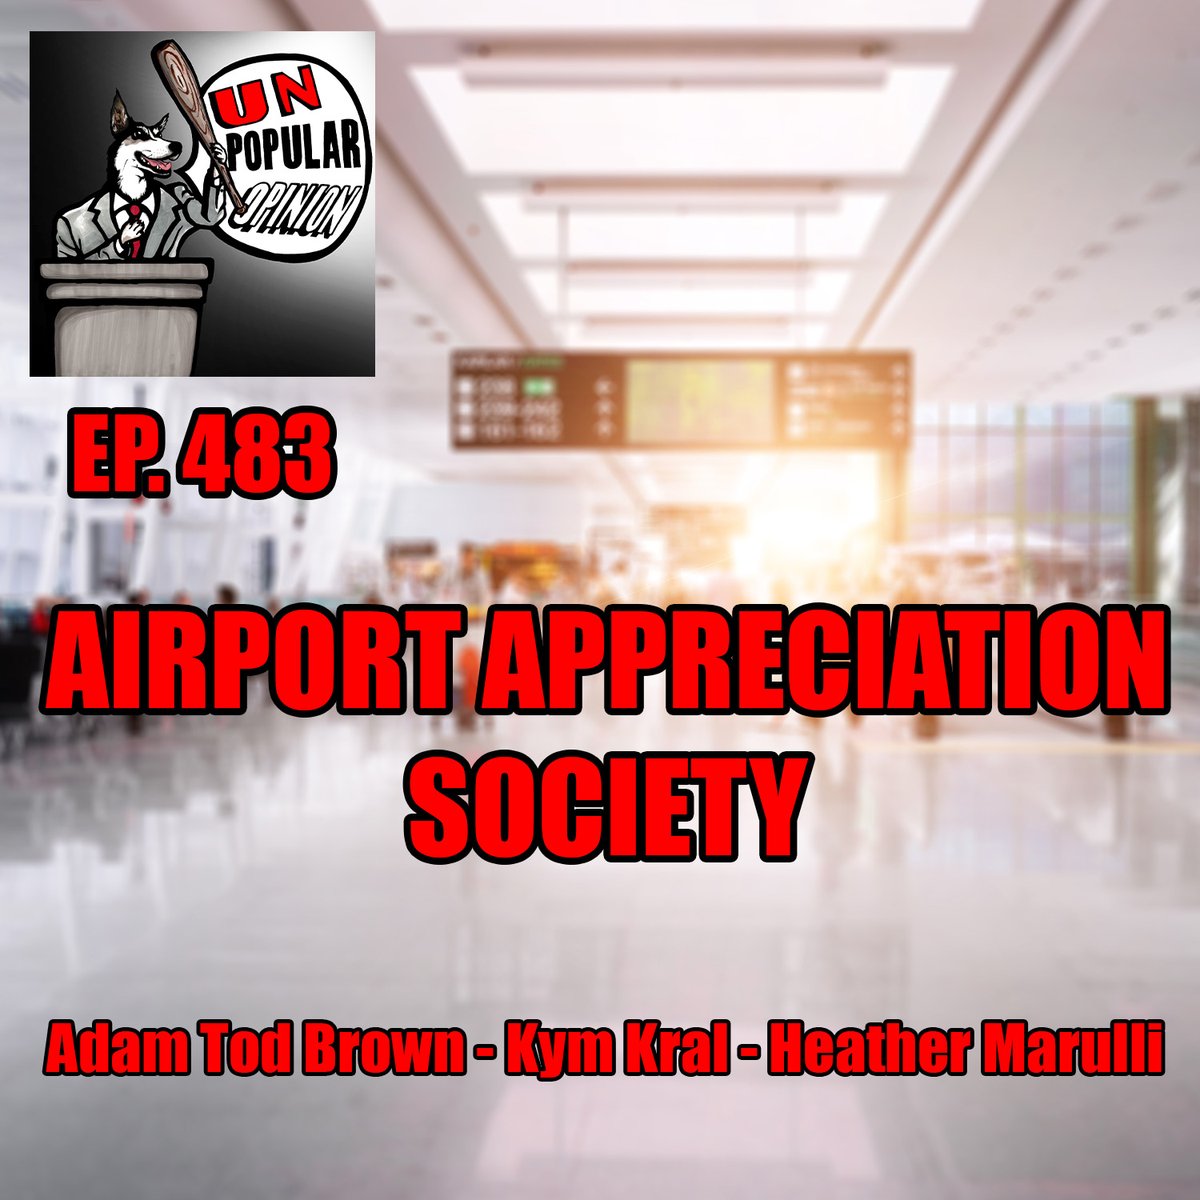 New @unpops up now! @adamtodbrown @KymKral and @FixedAirHeather argue #unpopularopinions about airports, ketchup, the Olympics, LA rain, and so much more! Get it at anchor.fm/unpops or wherever else podcasts are at!